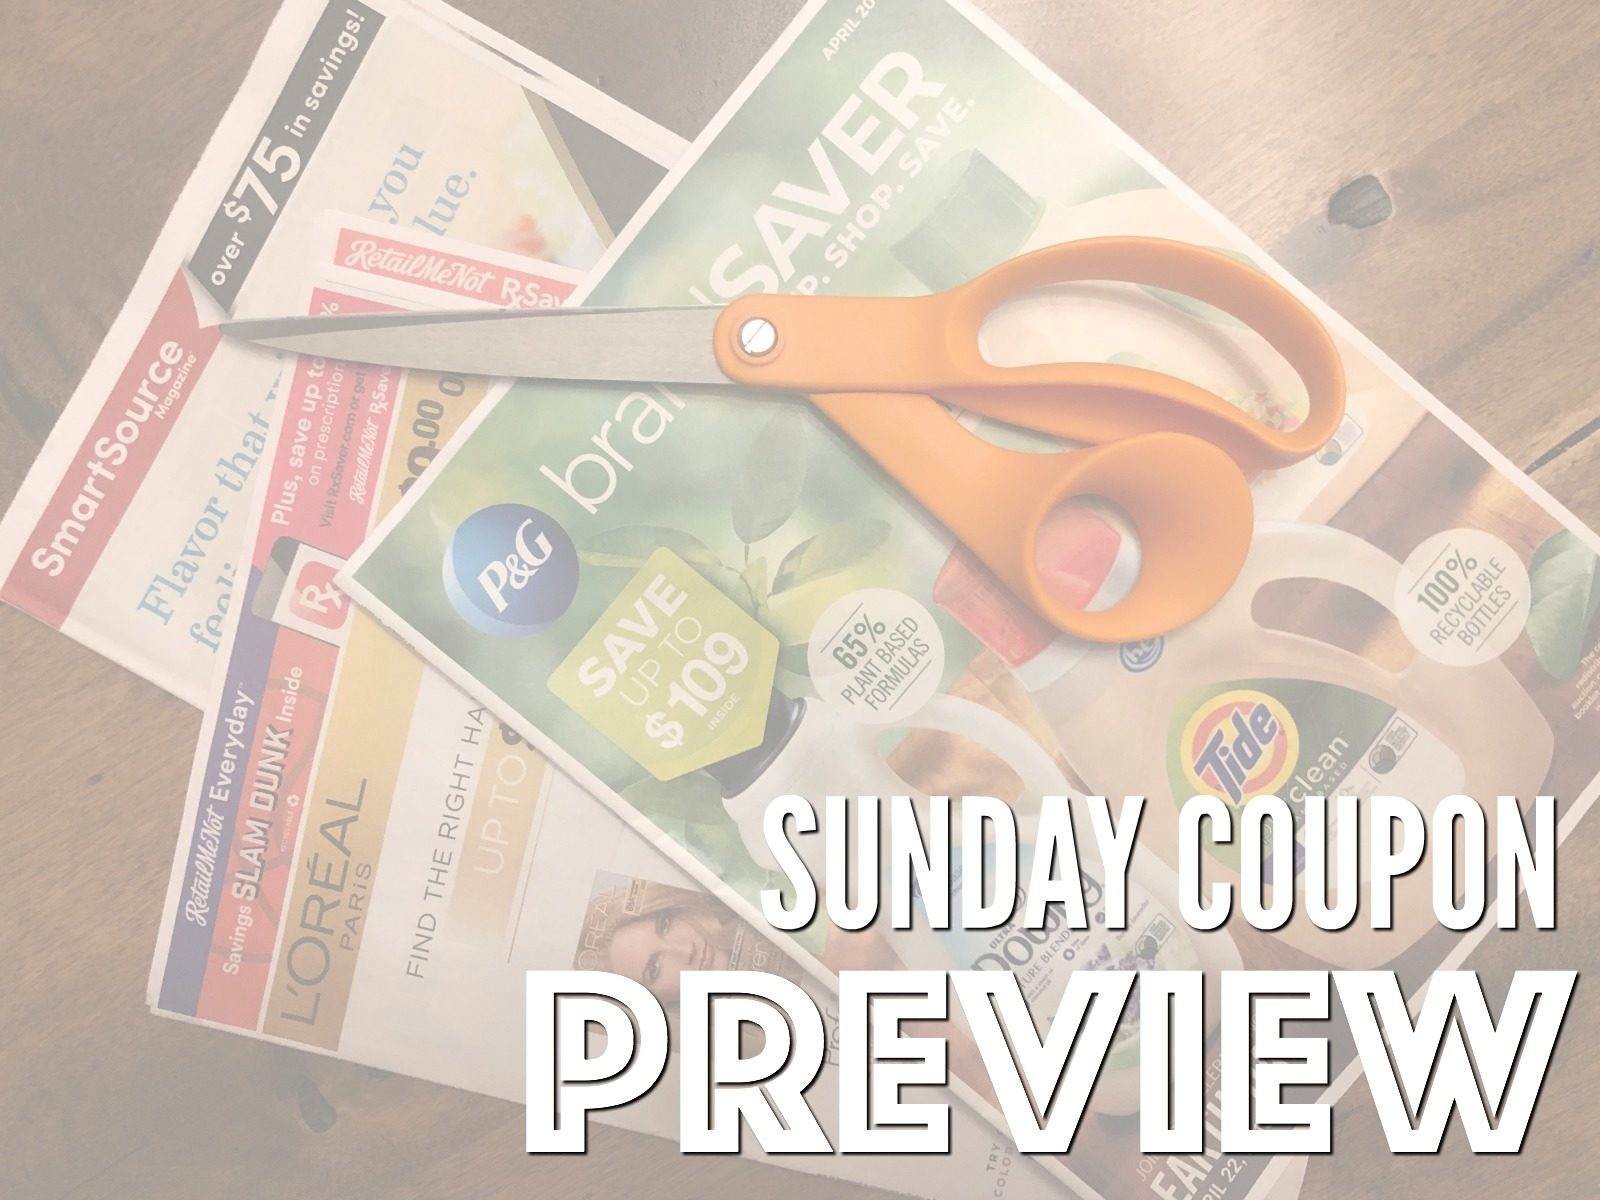 Sunday Coupon Preview For 5/5 - Three Inserts on I Heart Publix